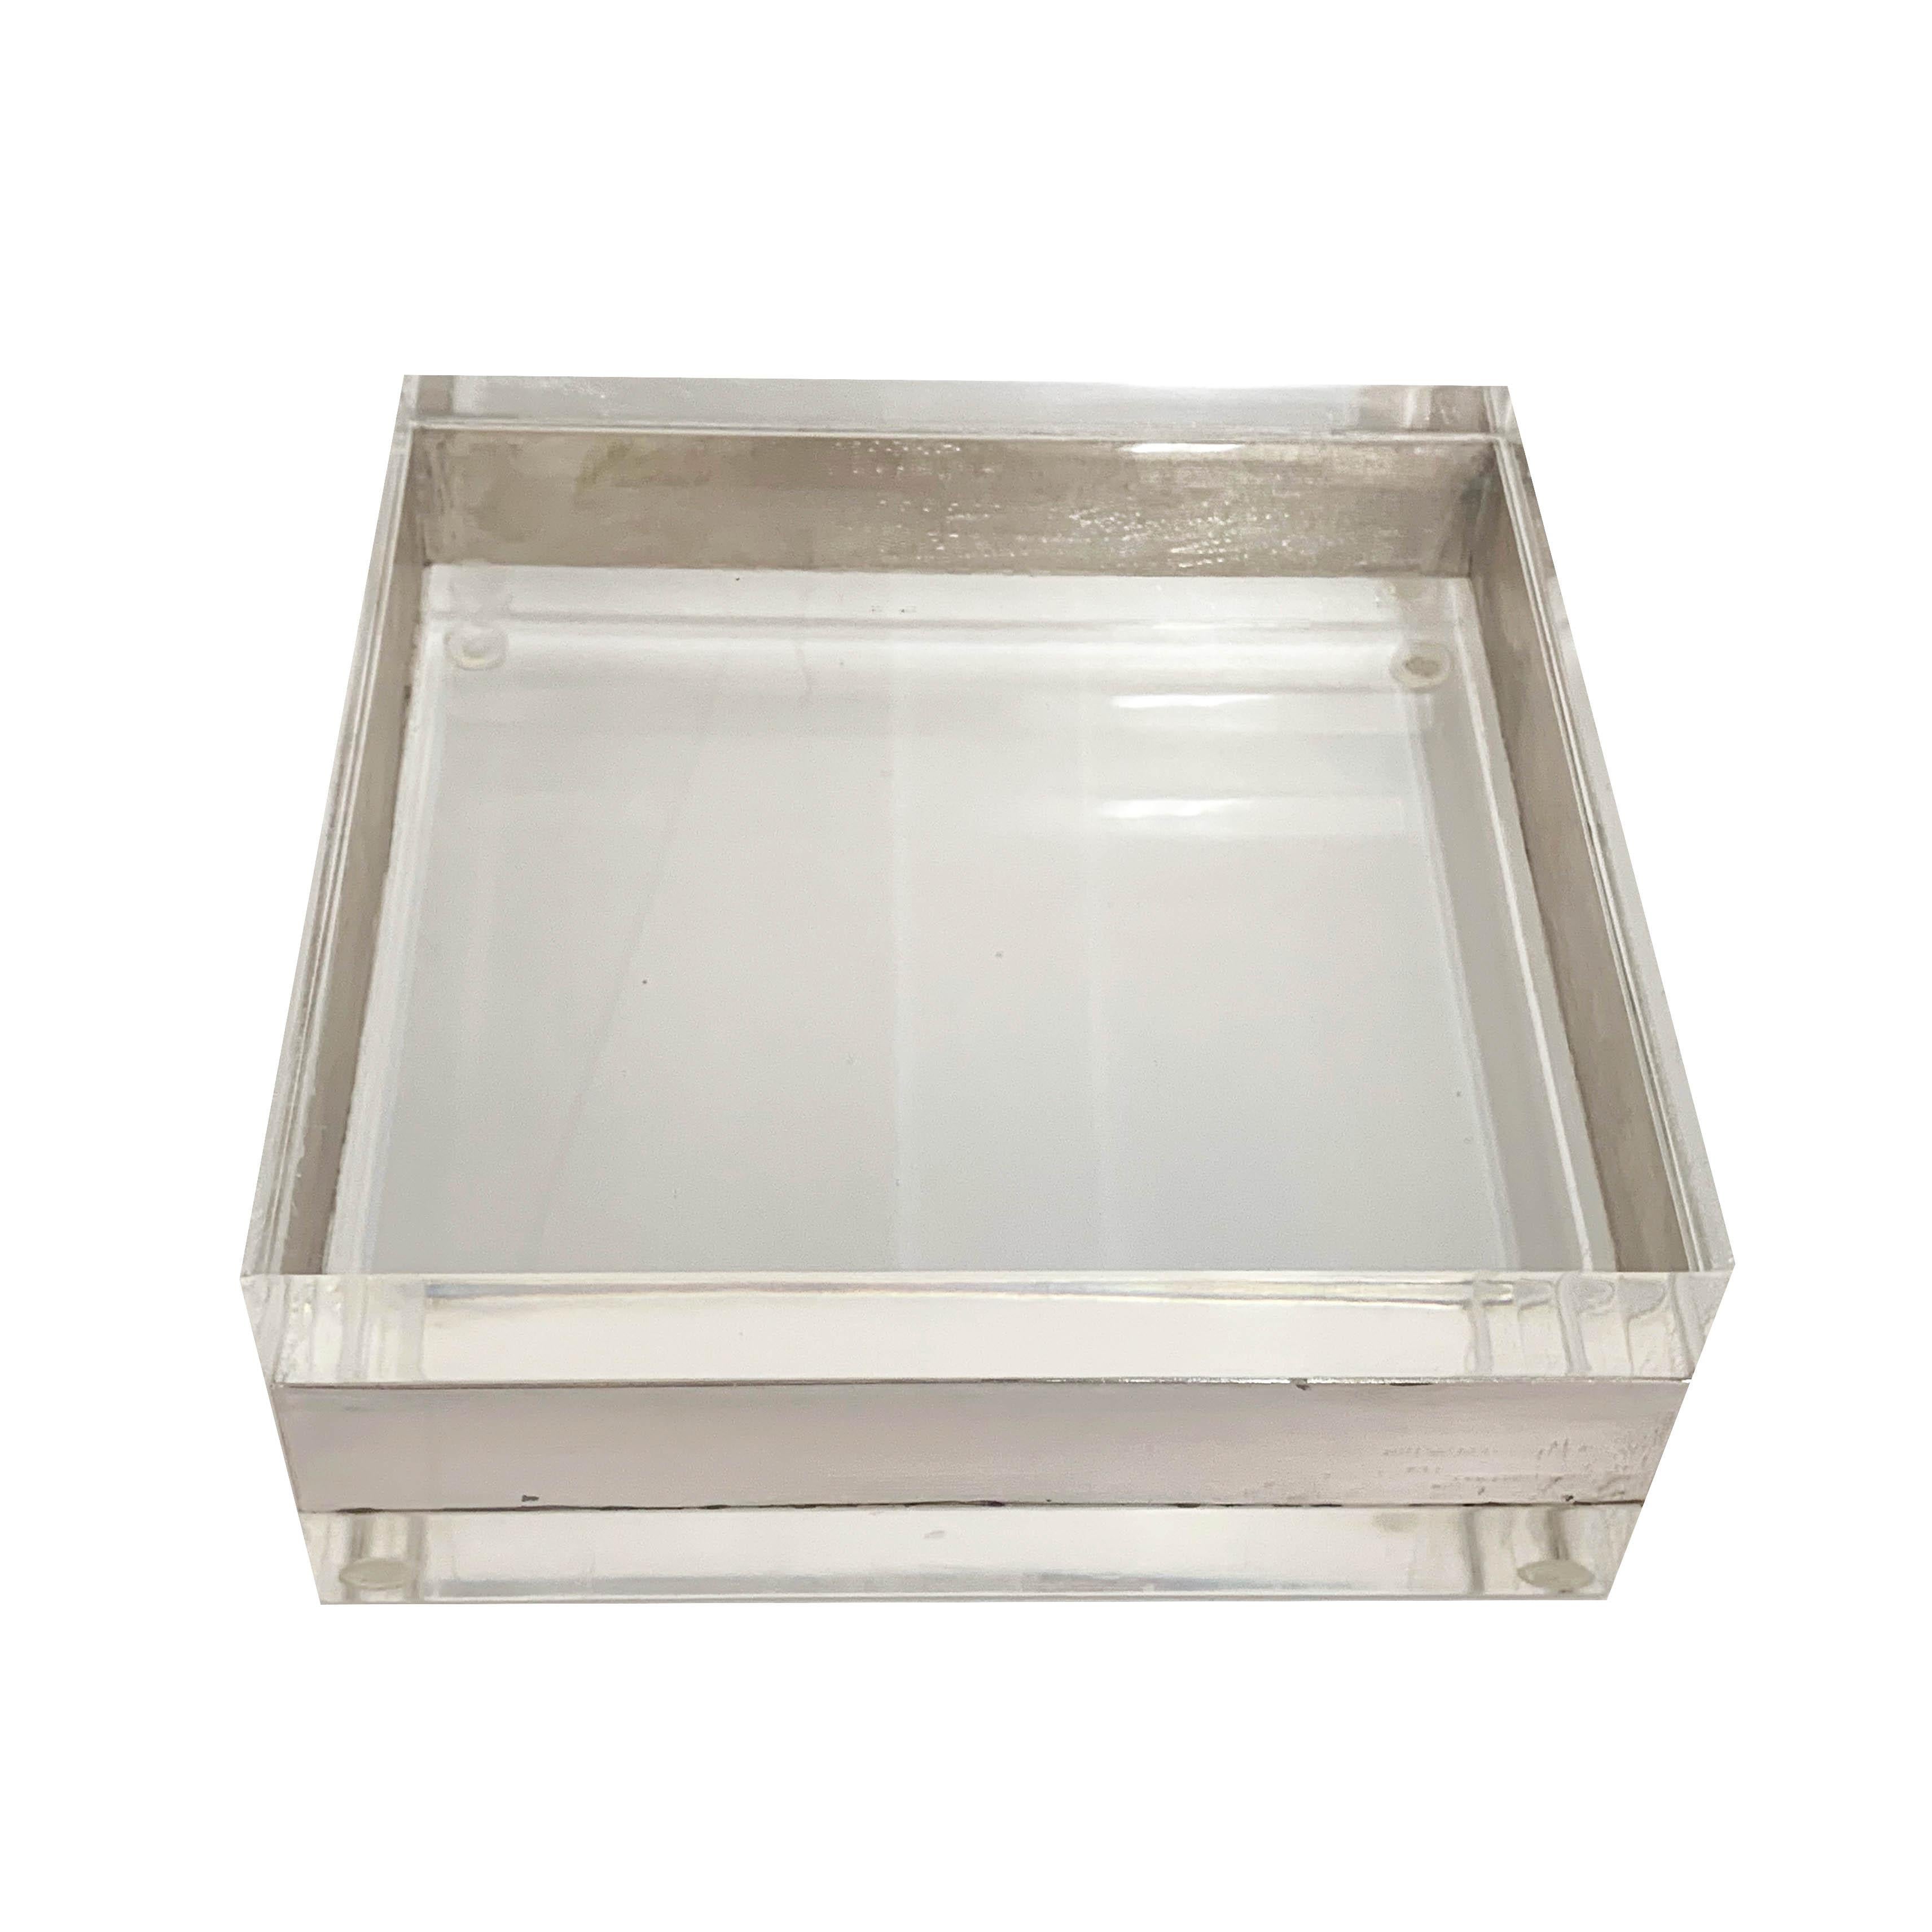 Mid-Century Modern Lucite and Silver Squared Italian Decorative Box, 1970s For Sale